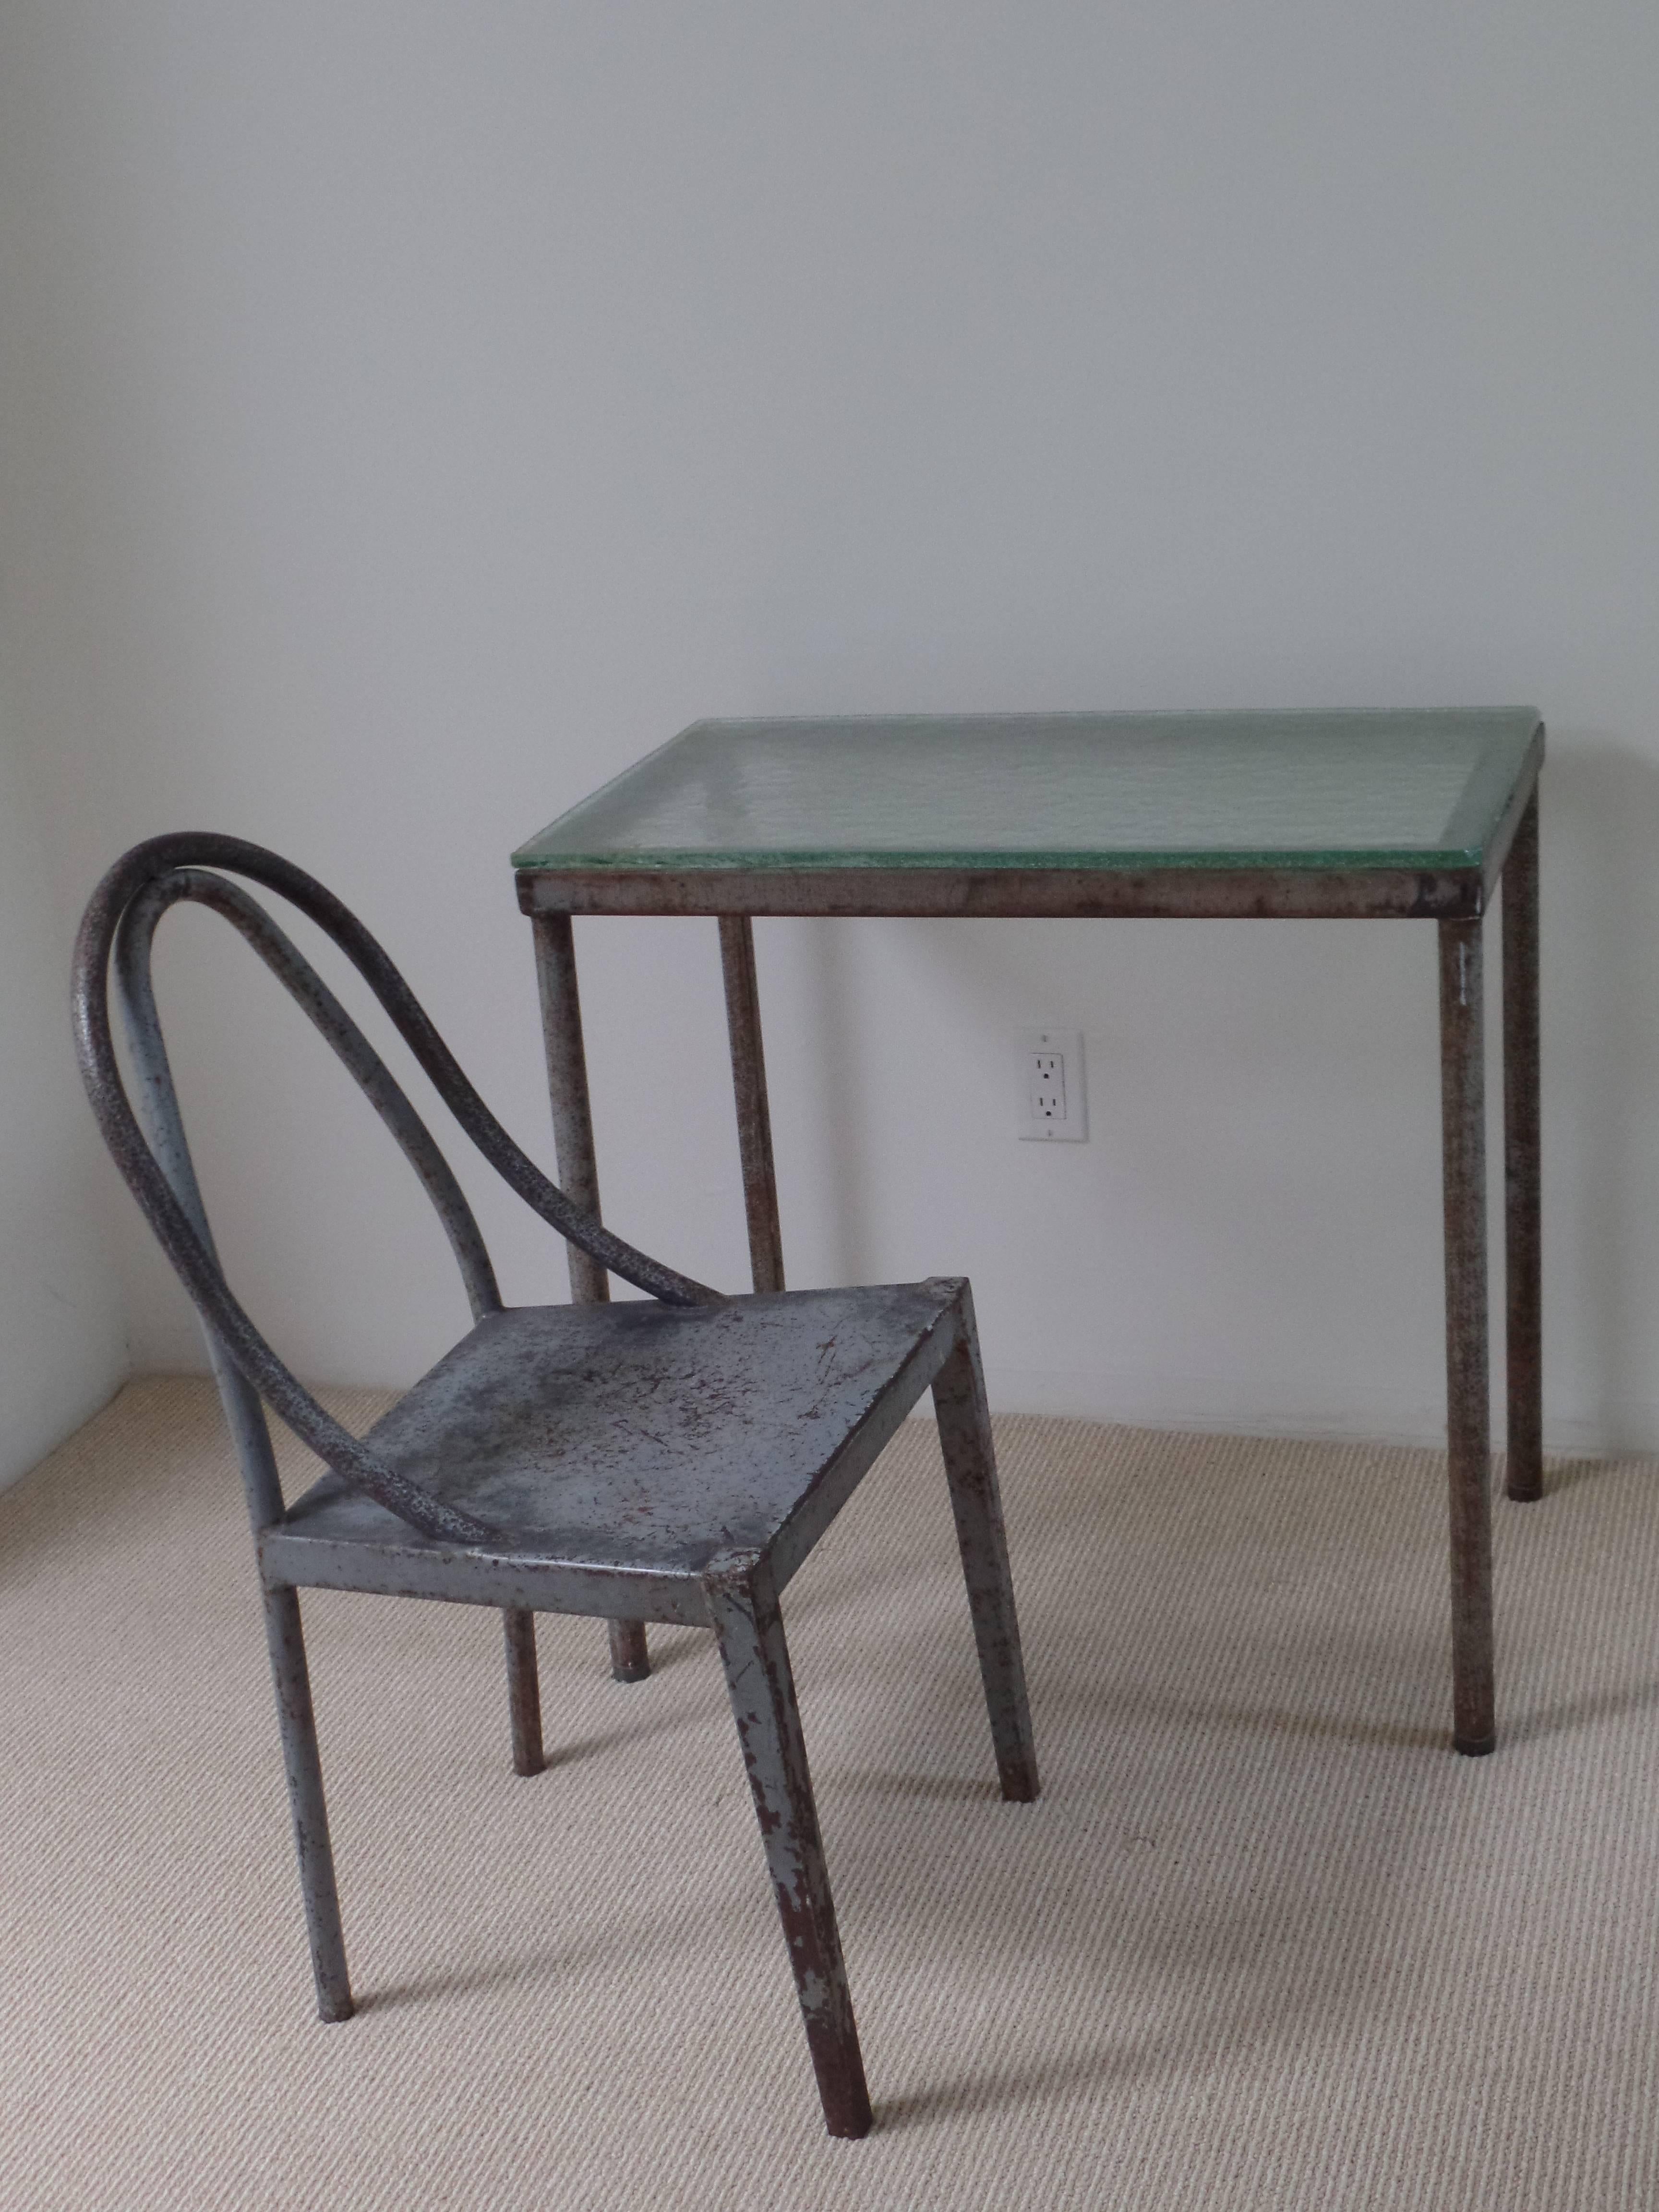 Rare handmade French modernist desk and chair prototypes in hand-formed and hand-hammered (non-commerially produced) tubular steel. The chair and desk are elegant architectural statements in their form and lines. Original top of sand-cast and steel